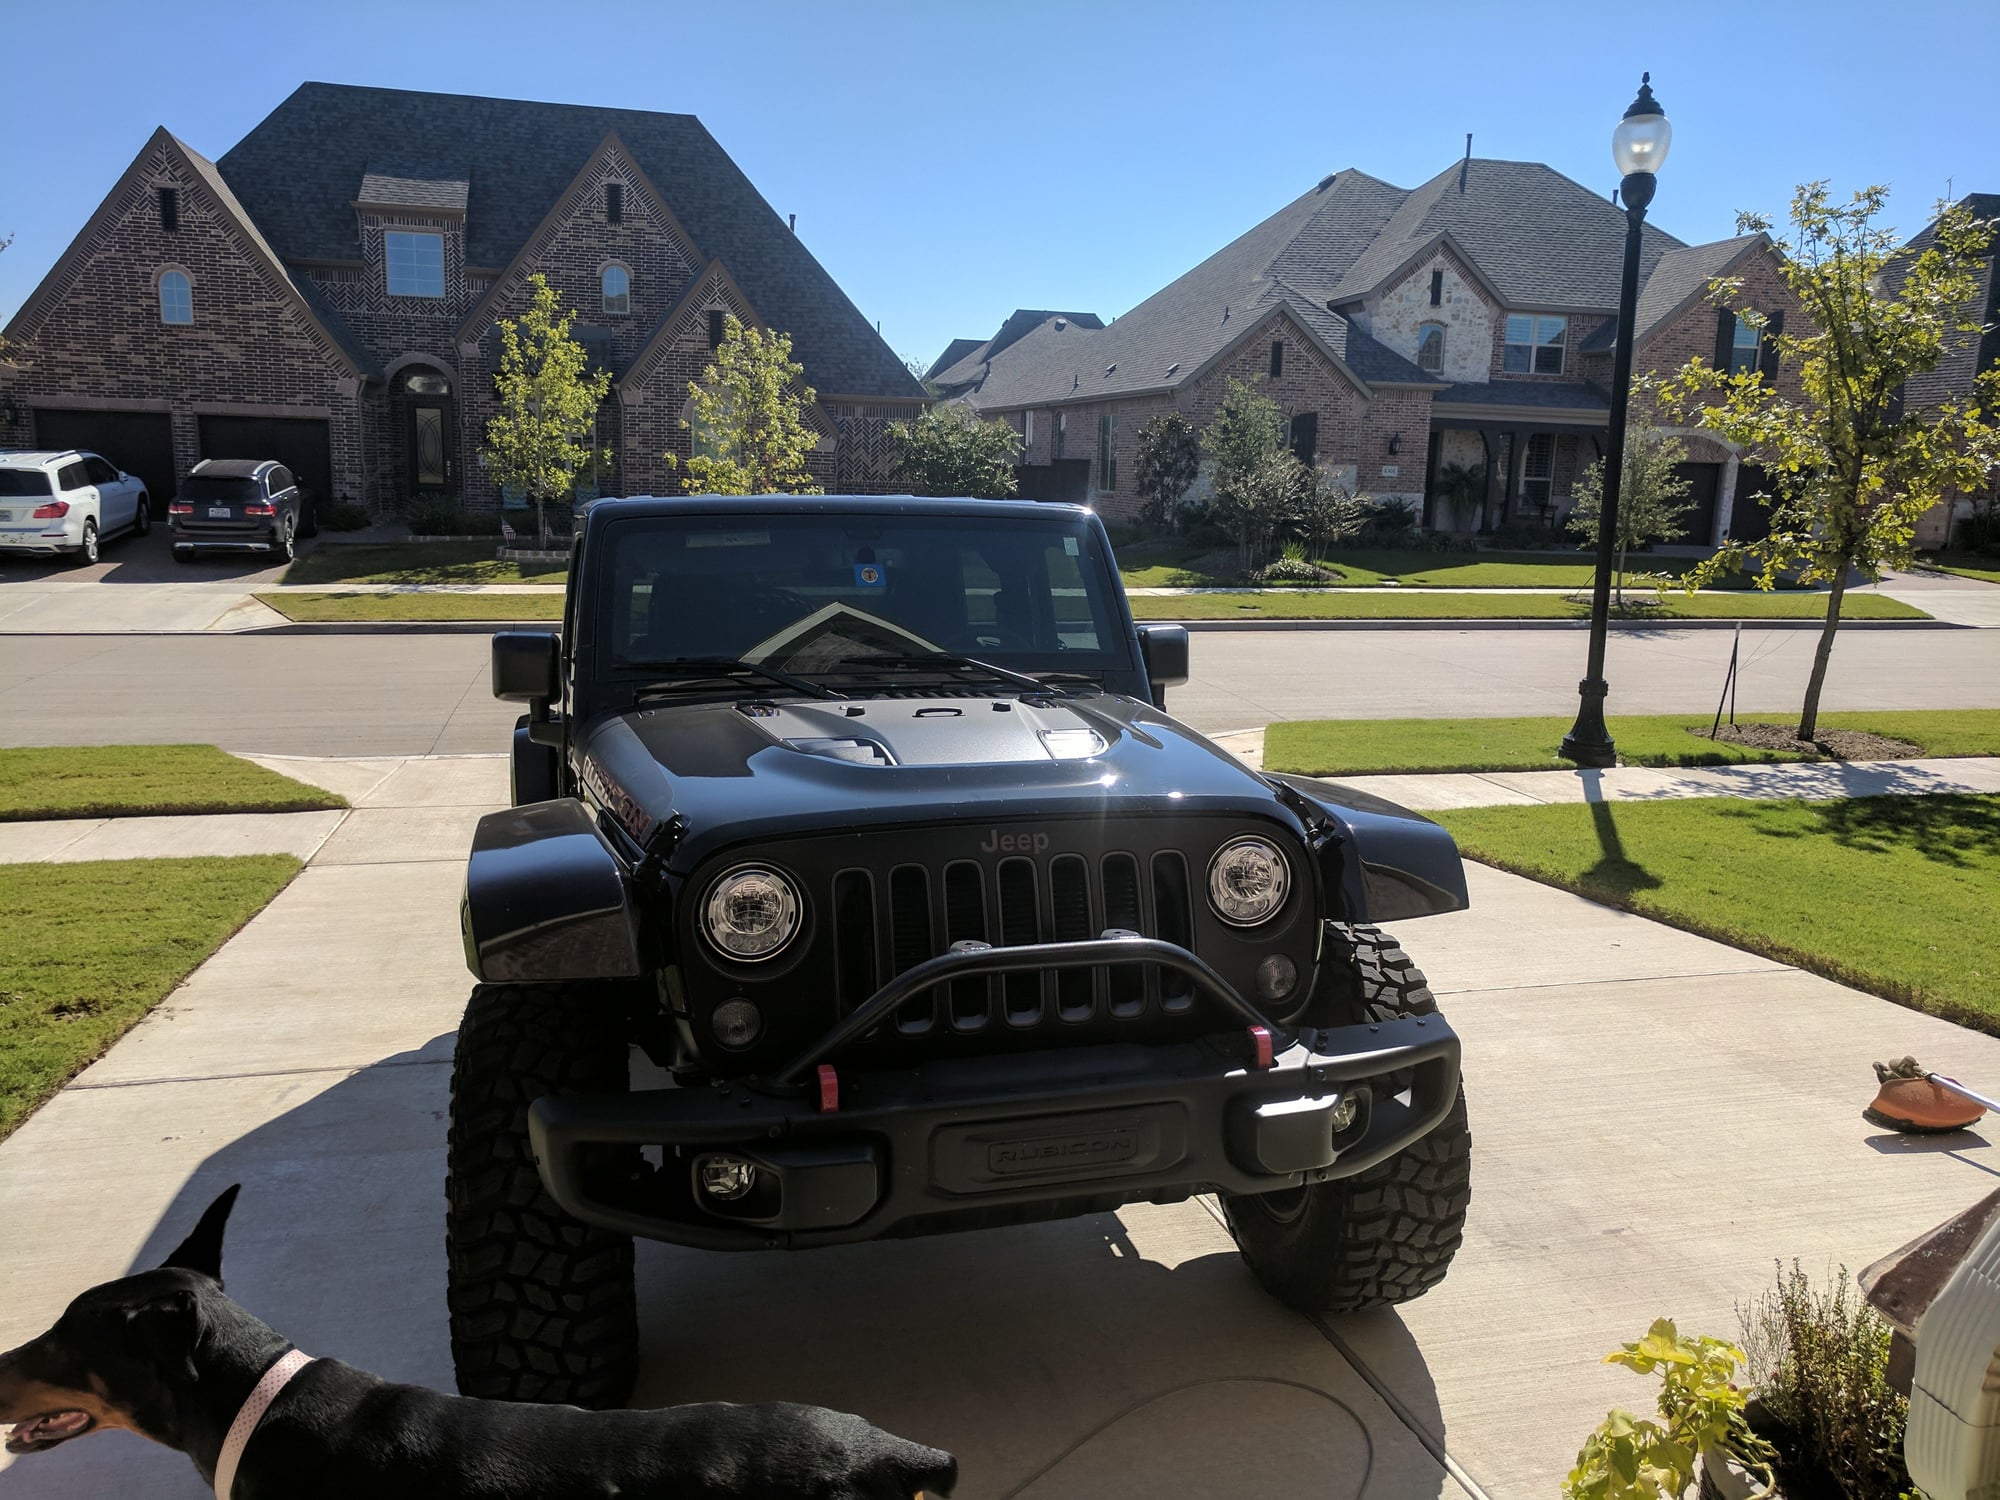 2017 Jeep Wrangler - 2017 Jeep JK Rubicon Recon Edition - Mildly Modded - Used - VIN 1C4BJWCG4HL638179 - 10,000 Miles - 6 cyl - 4WD - Automatic - SUV - Black - Prosper, TX 75078, United States